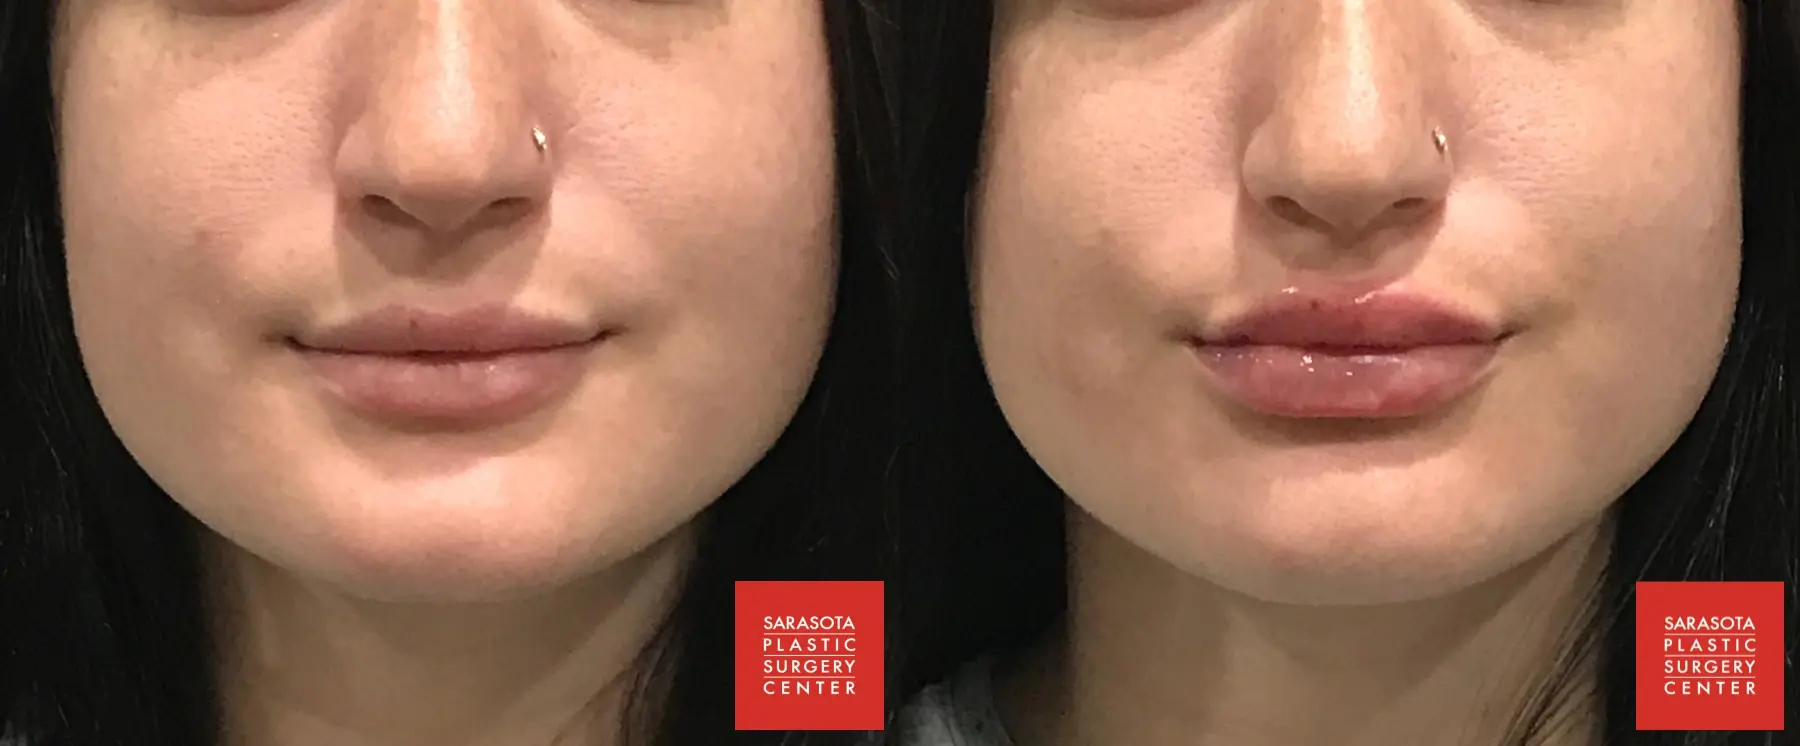 Injectables - Face: Patient 2 - Before and After  